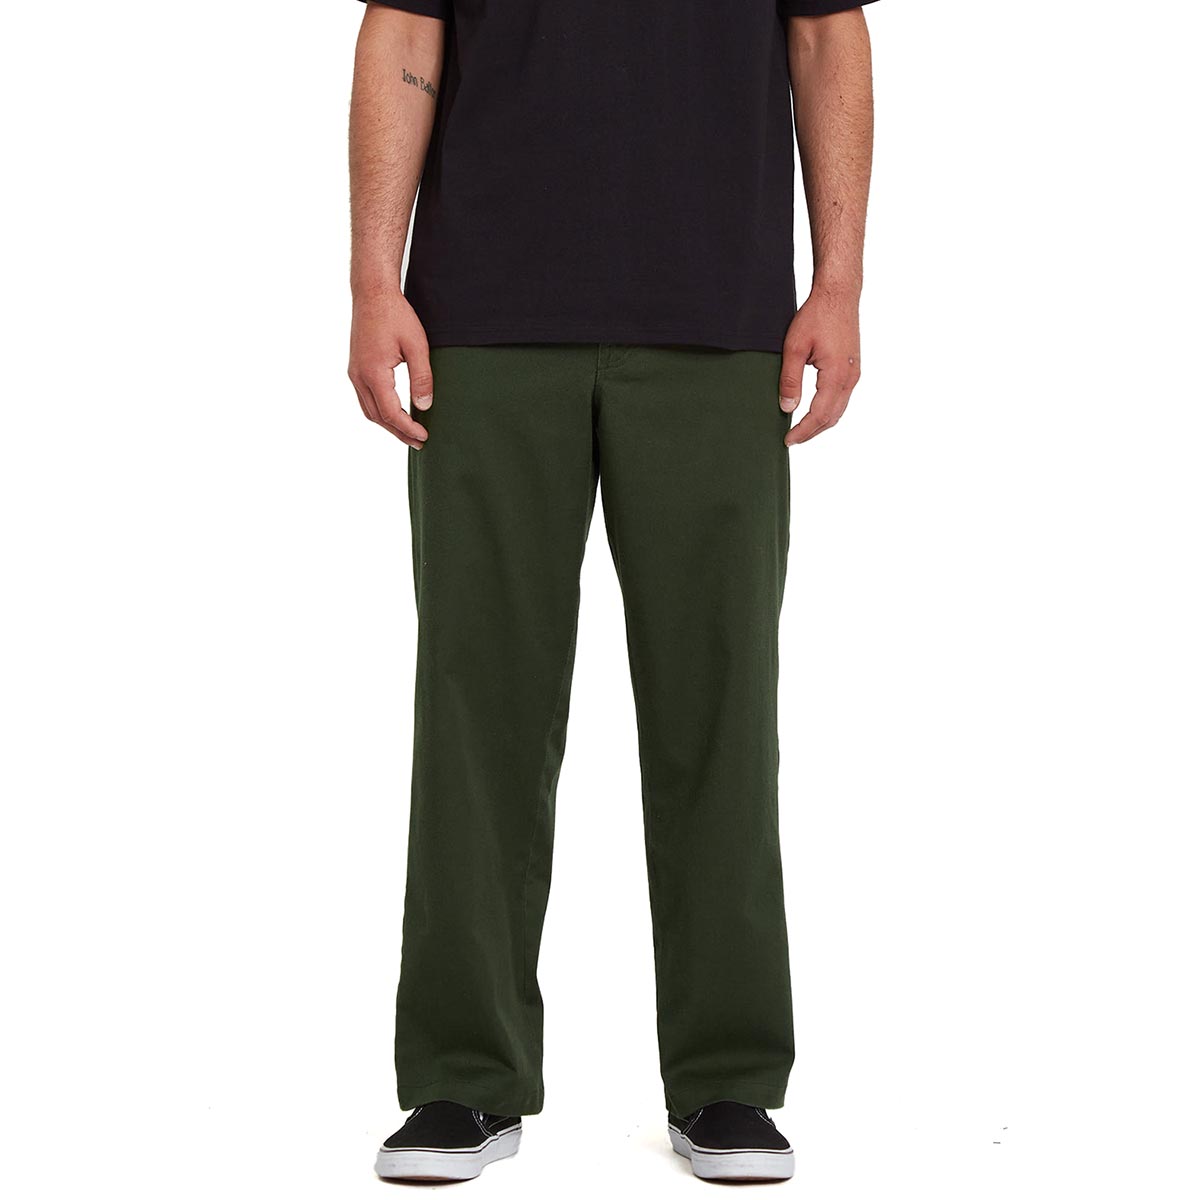 VOLCOM - LOOSE TRUCK CHINO TROUSERS